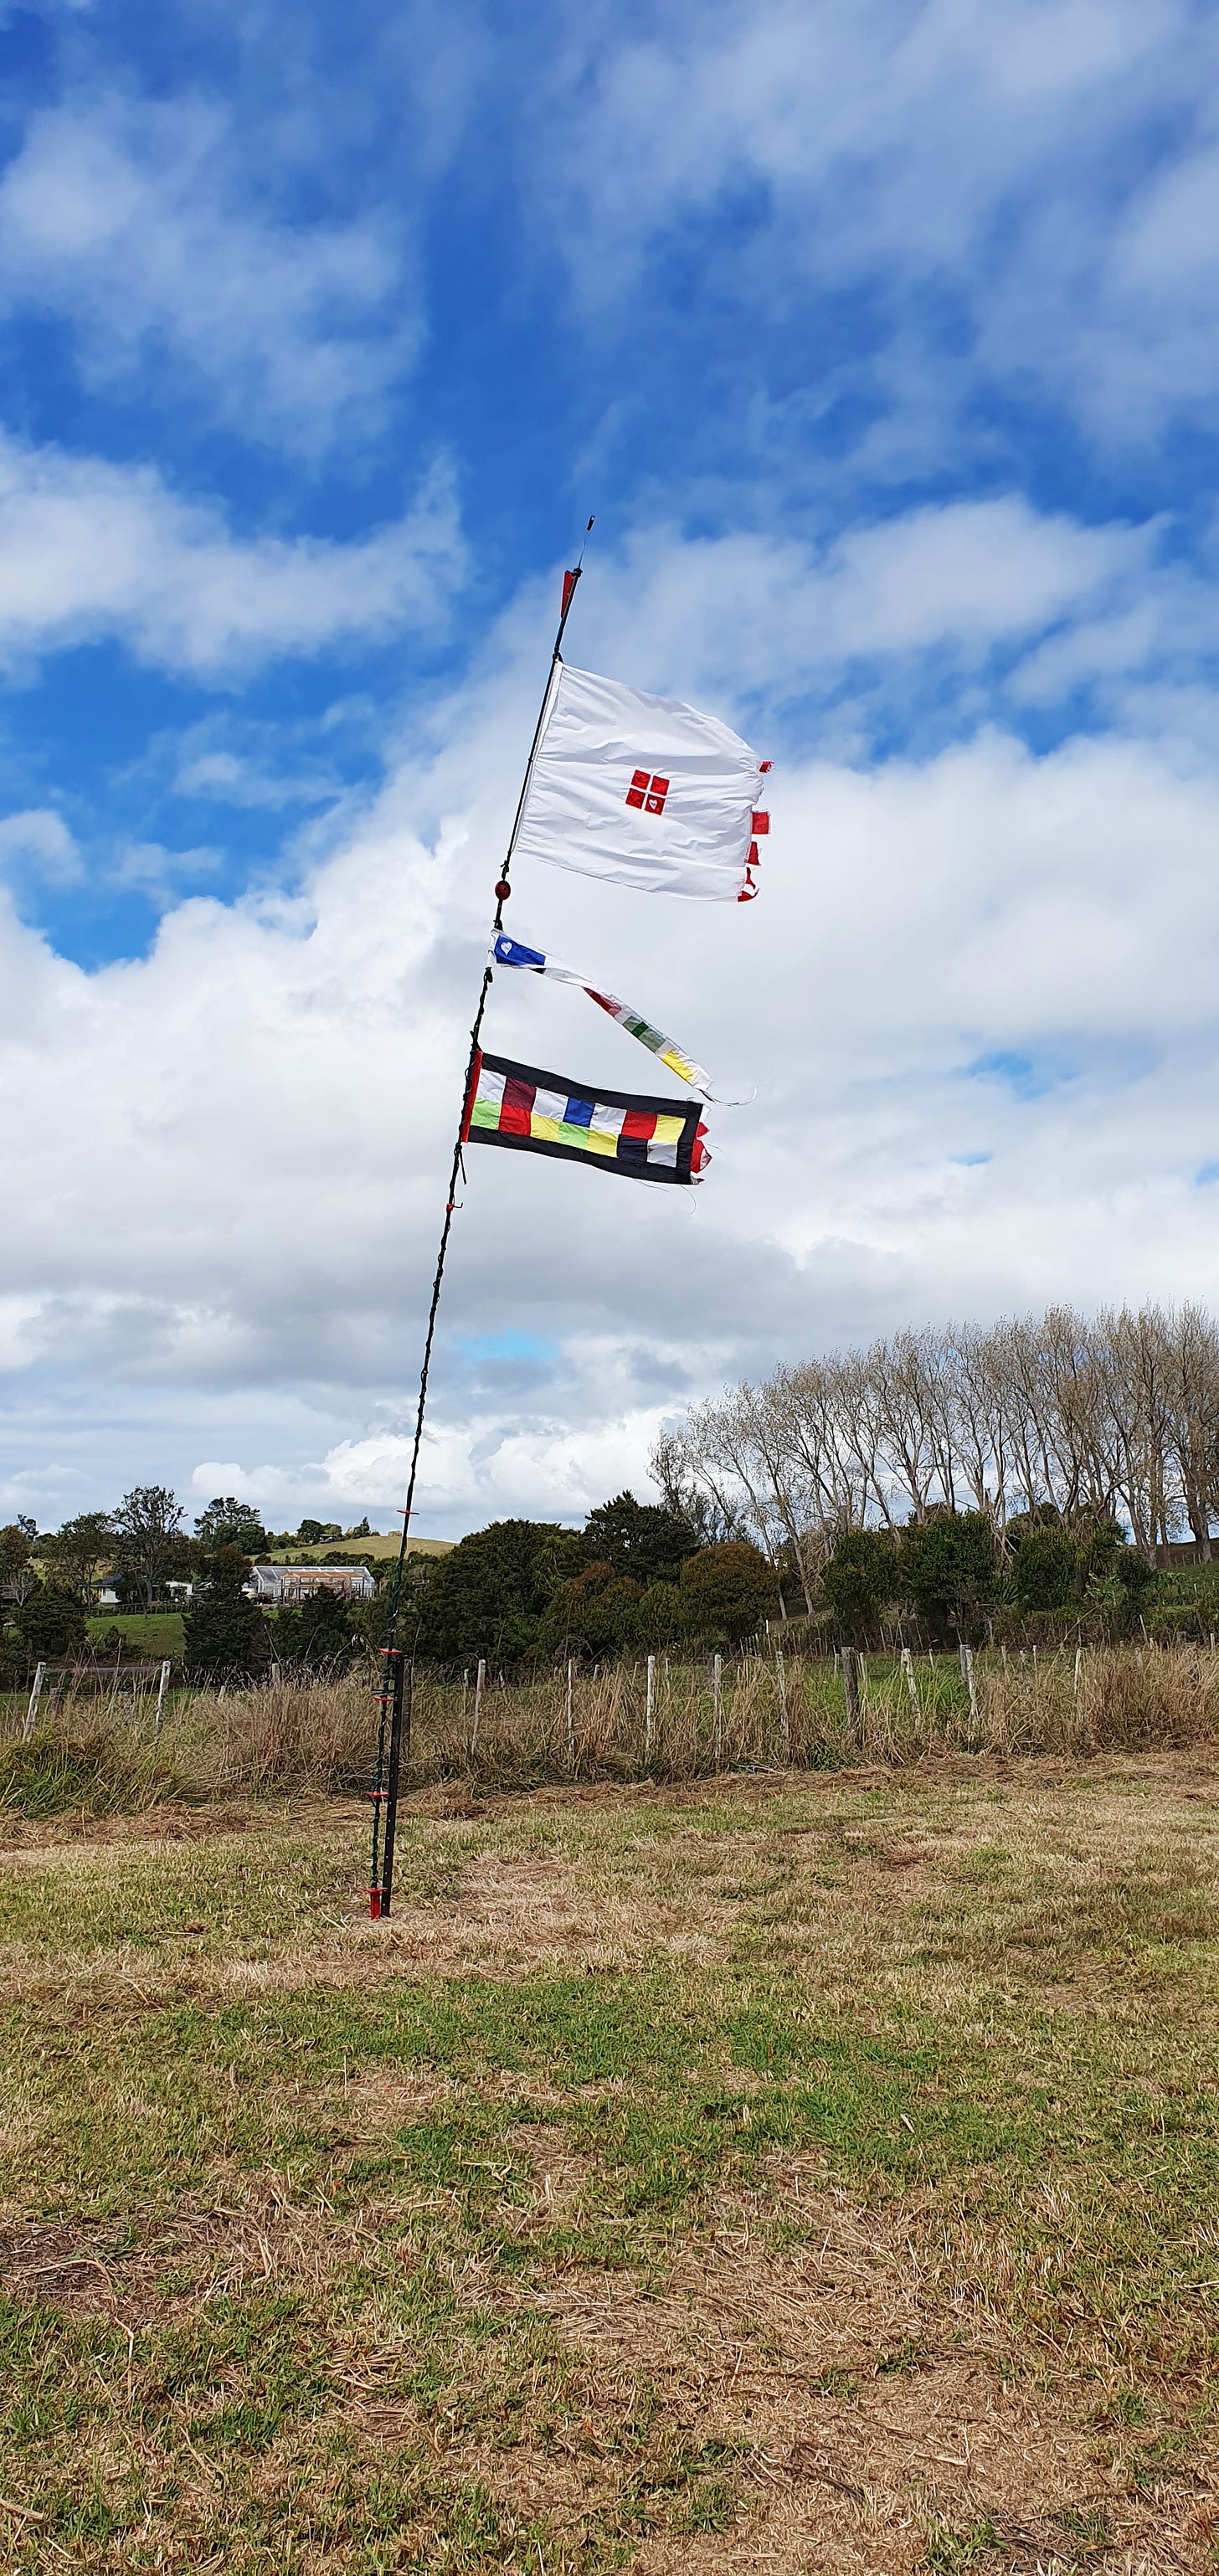 New flags flying on new pole in top paddock on a different day when there was more light and wind.